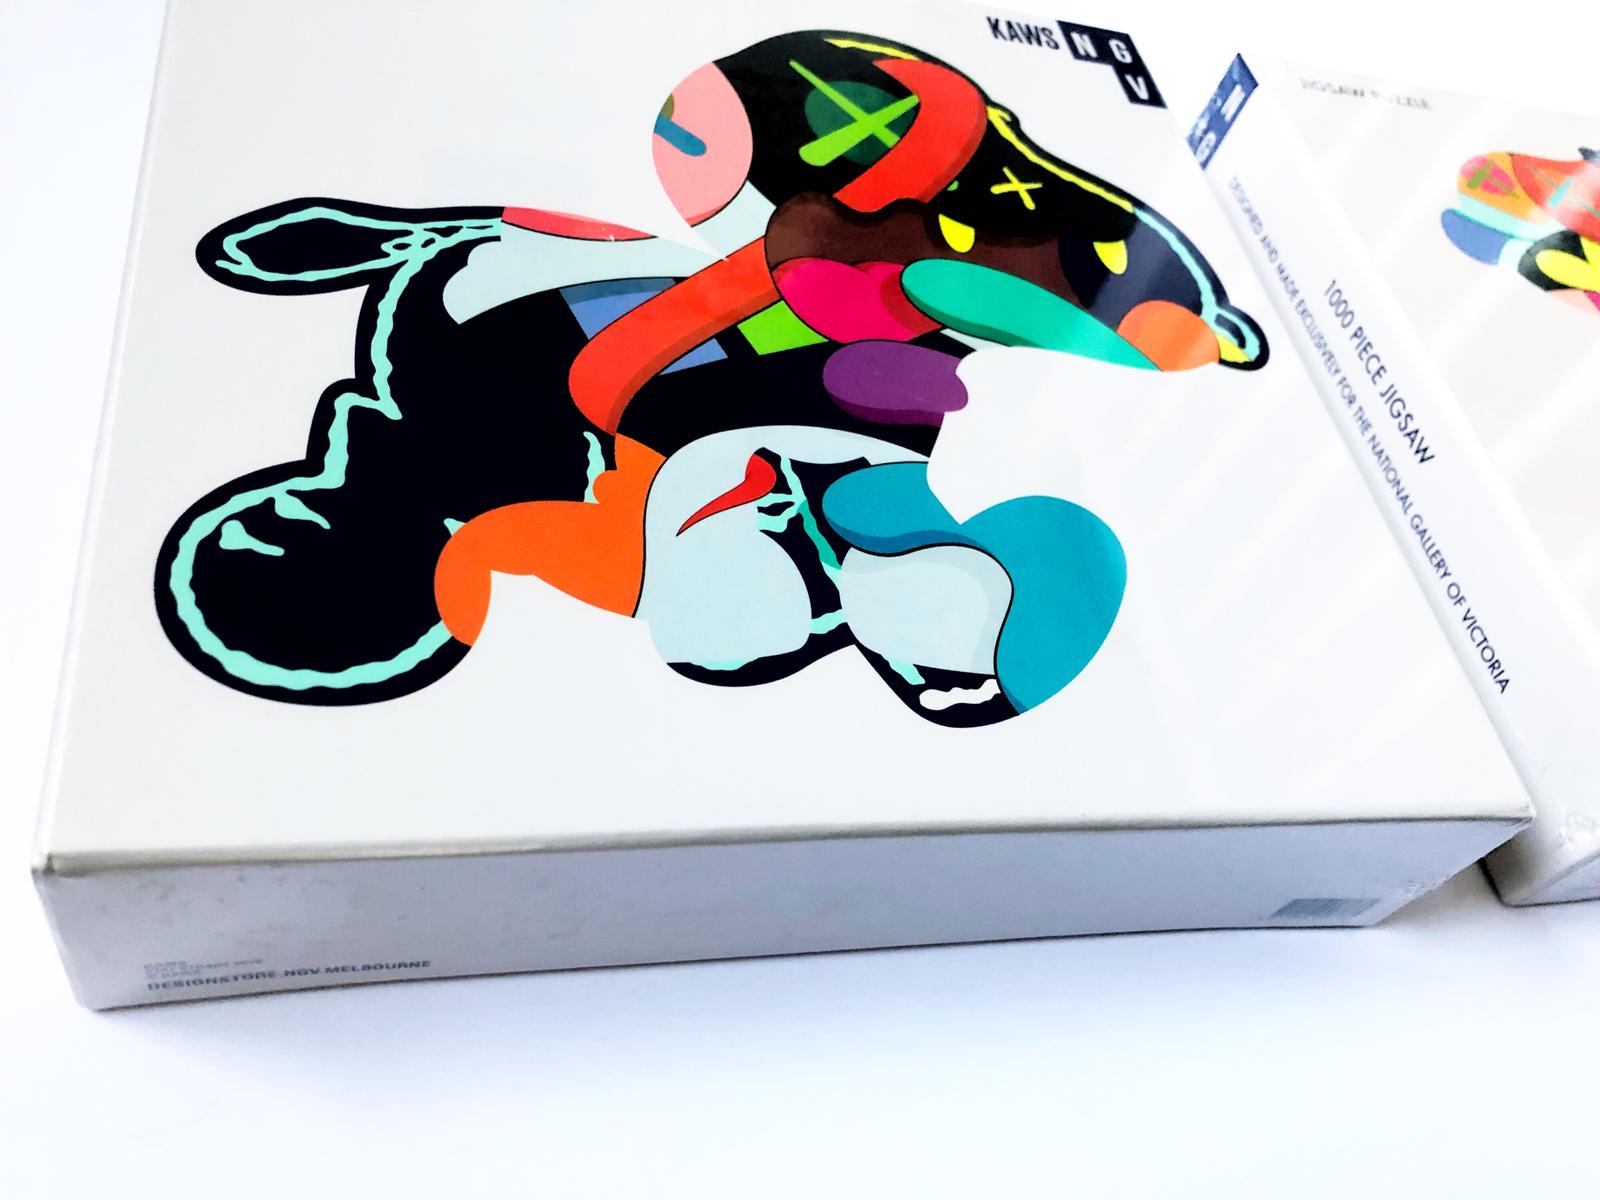 kaws stay steady puzzle new unopened